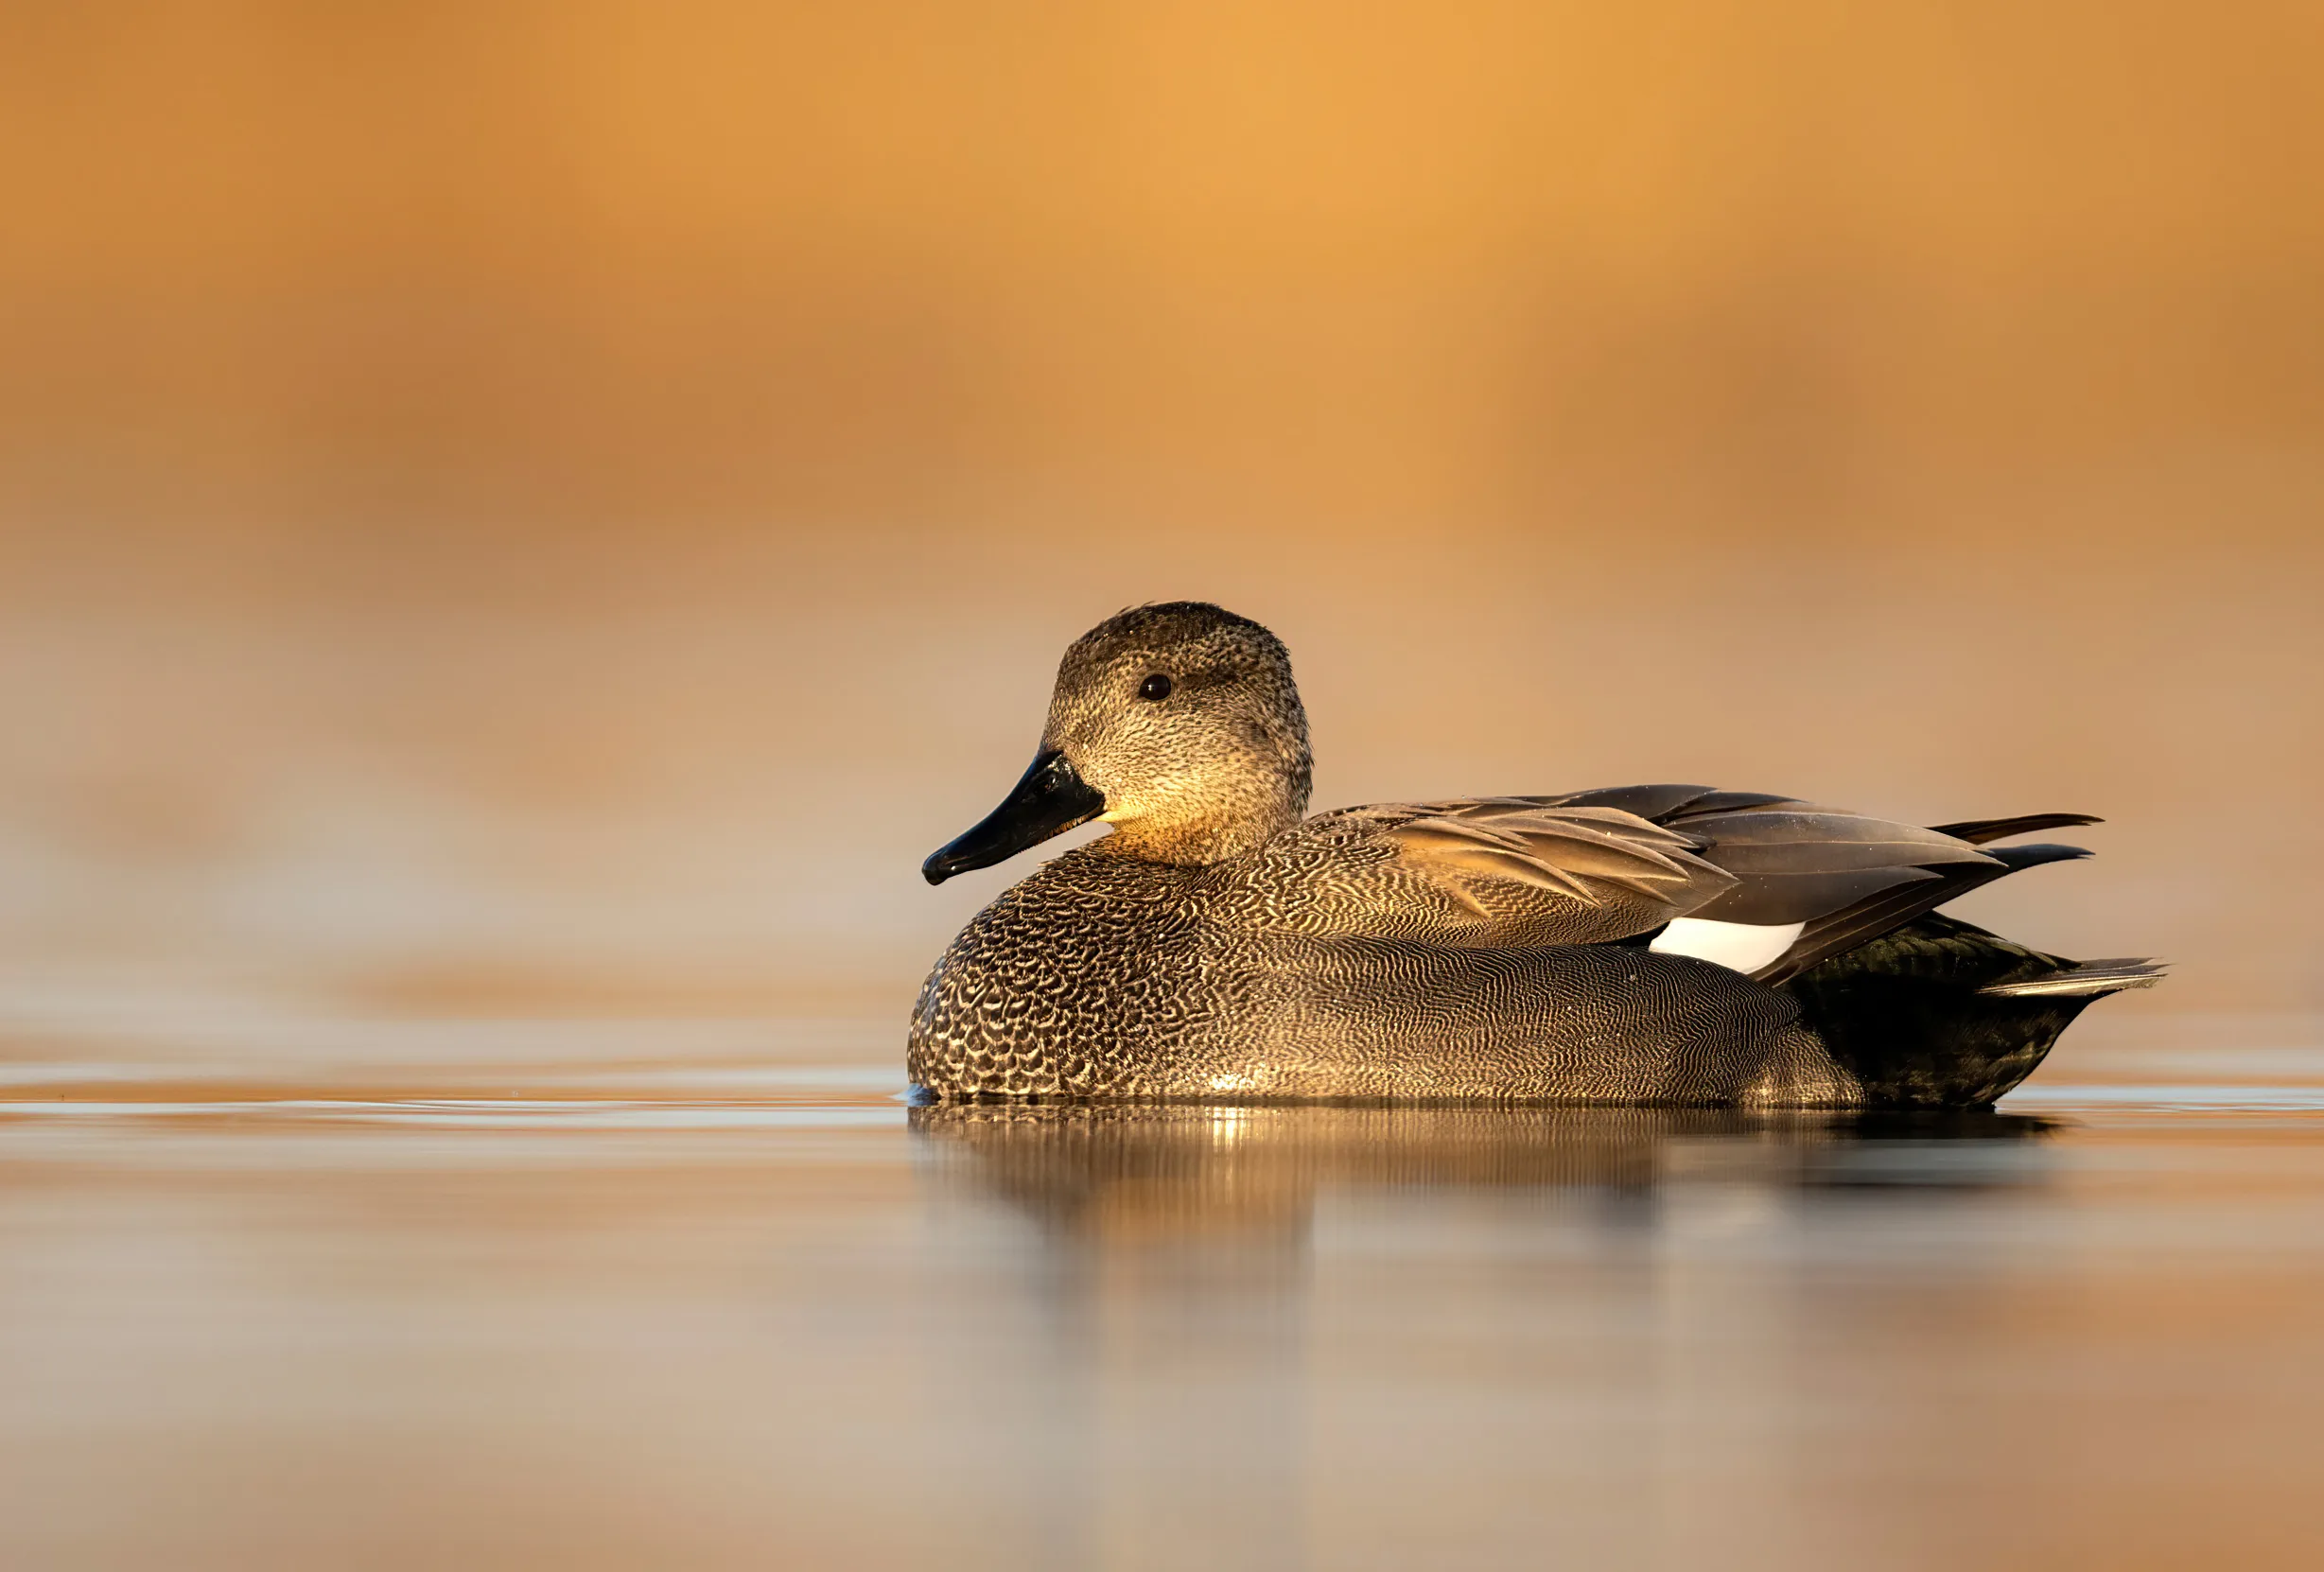 A close-up of a male Gadwall sat on water at sunset.